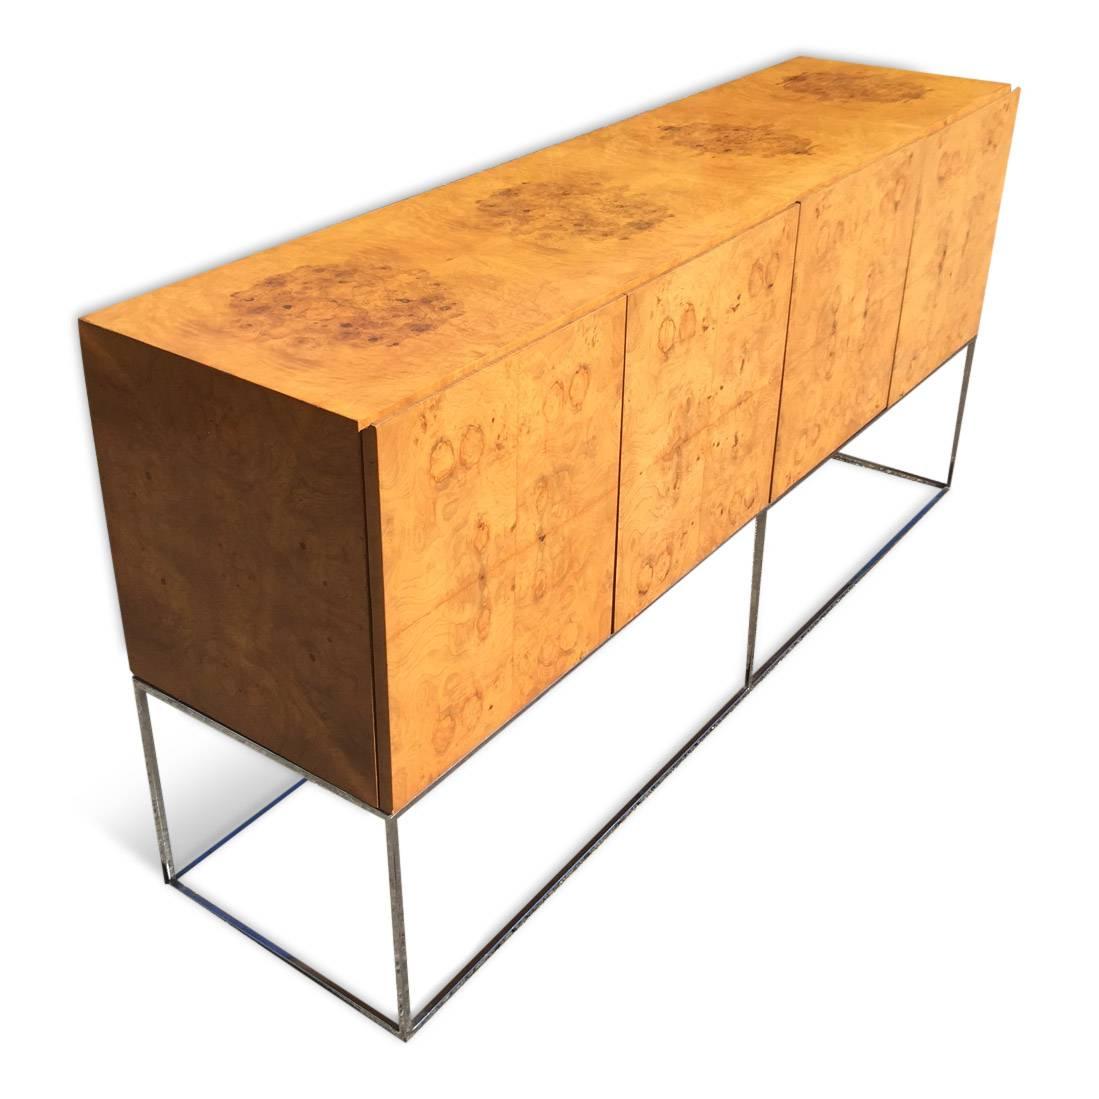 For your consideration is a beautiful Milo Baughman for Thayer Coggin sideboard or credenza in book matched olive burl wood veneer on a slim chrome base. 

The piece is a beautiful Mid-Century Modern 1970s statement piece from one of the masters